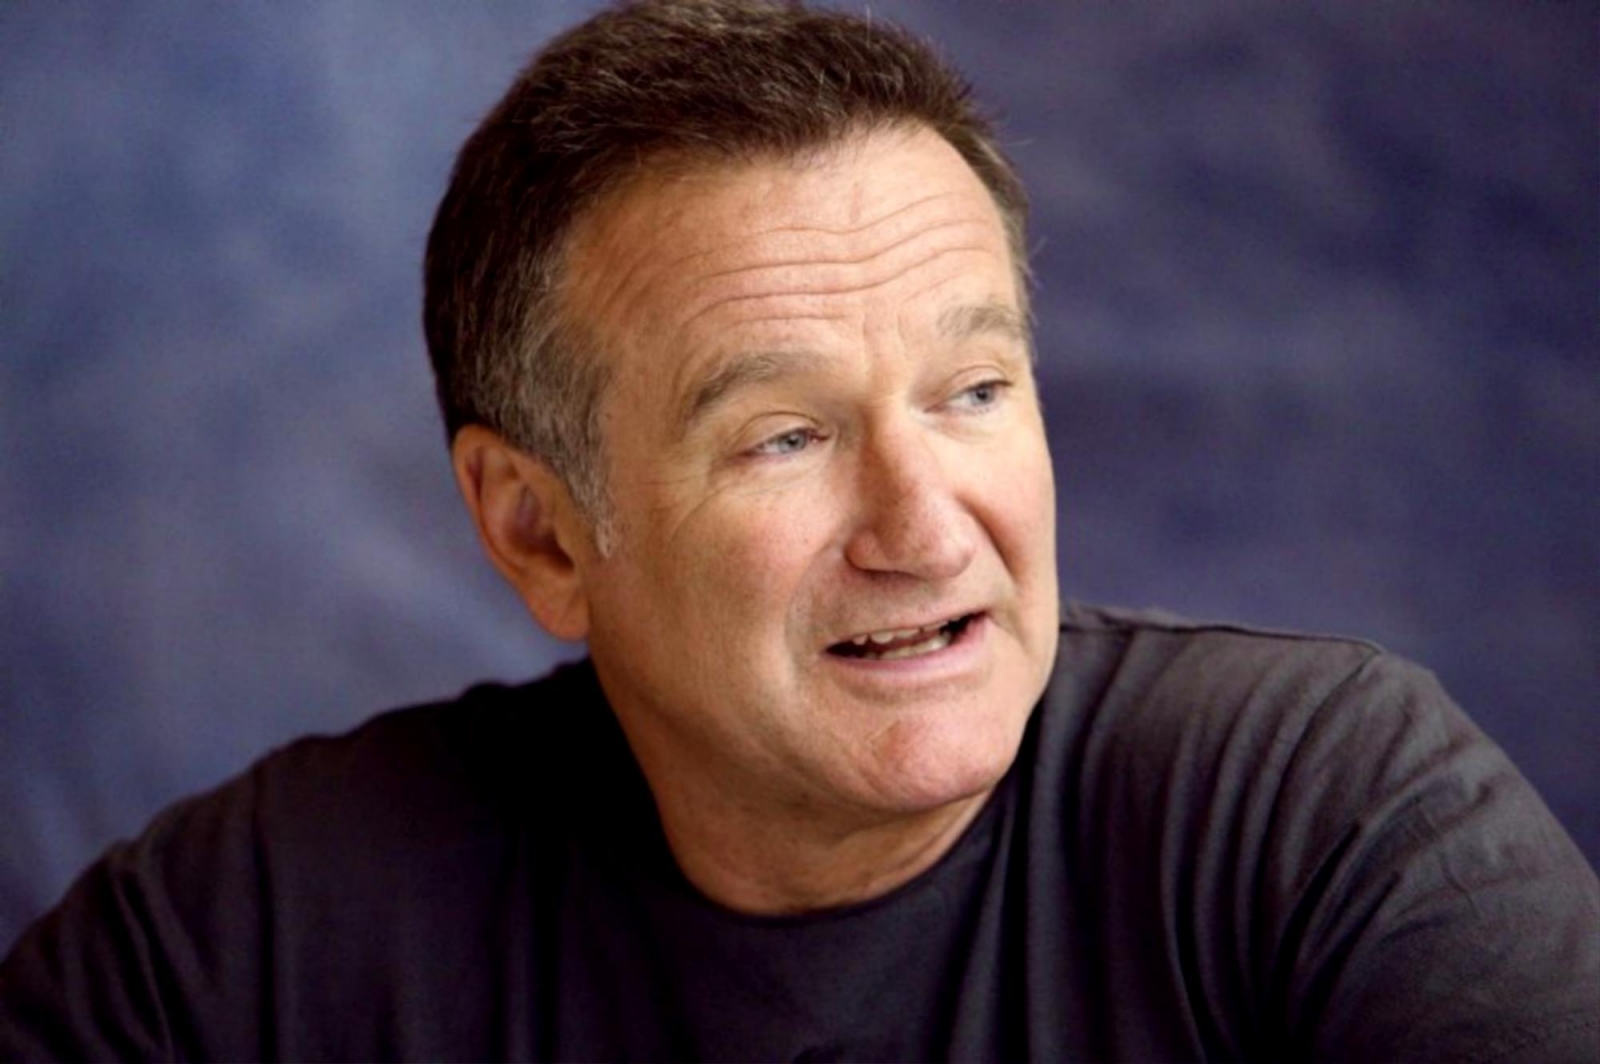 Robin Williams, Oscar-Winning Actor and Comedian Dies aged 63